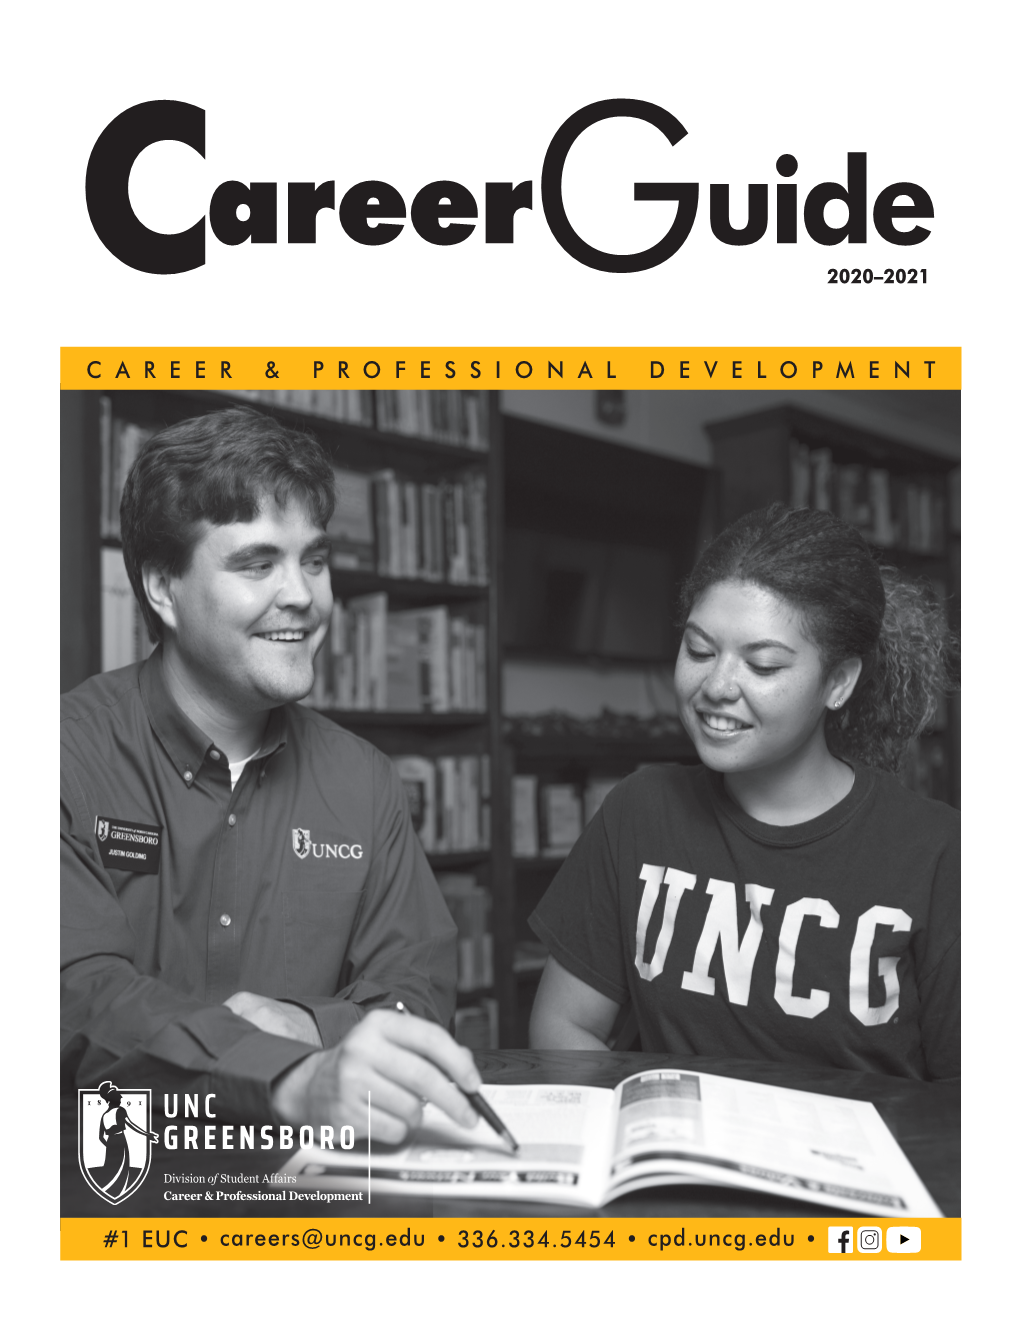 Check out the 25Th Anniversary Edition of UNCG's Career Guide!